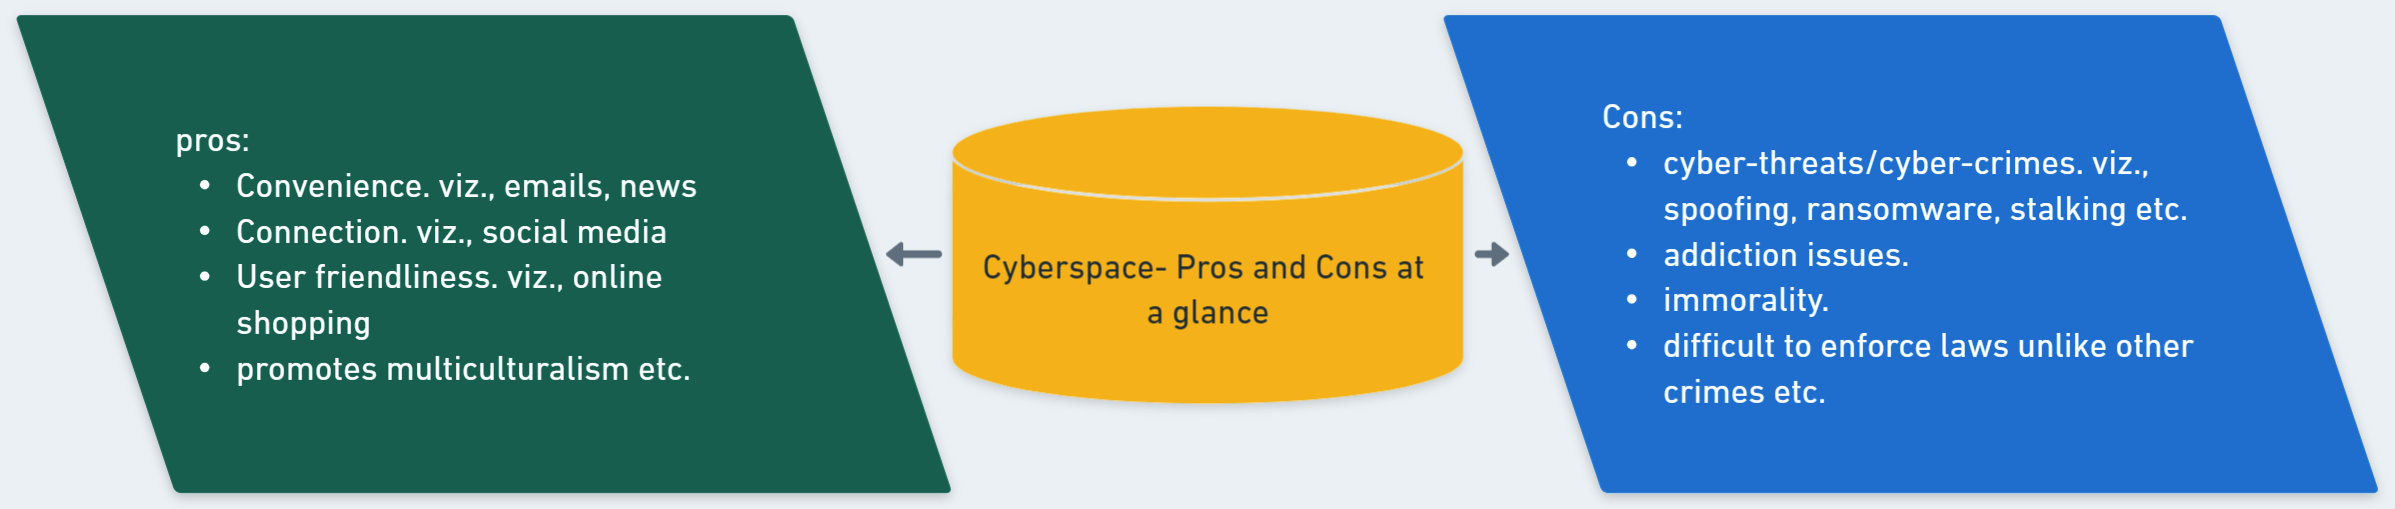 Cyberspace-pros and cons